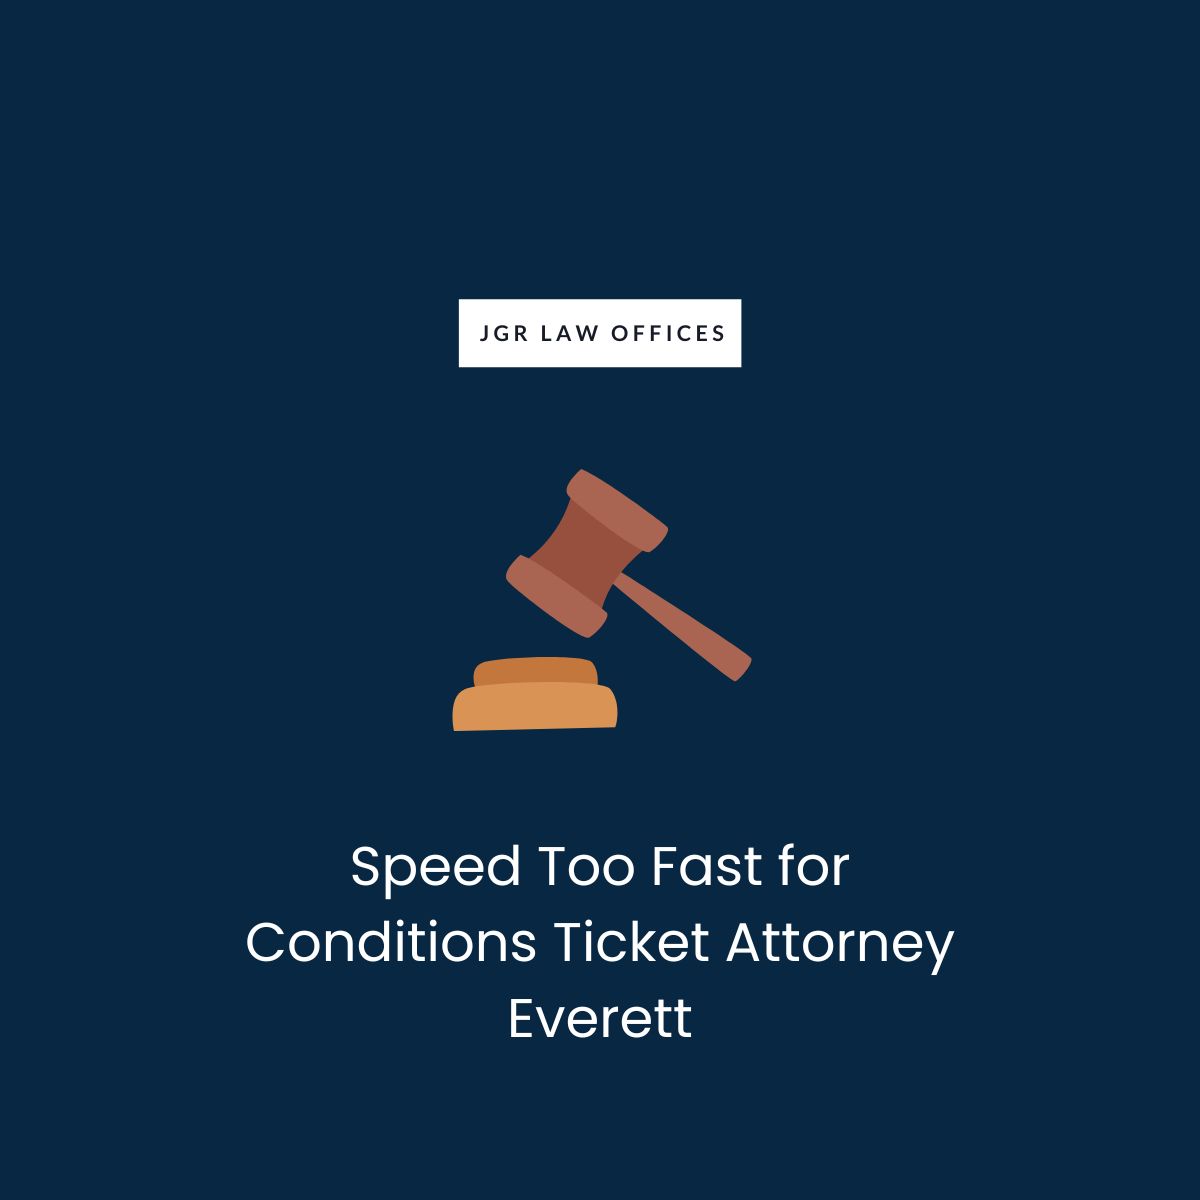 Speed Too Fast for Conditions Ticket Attorney Everett